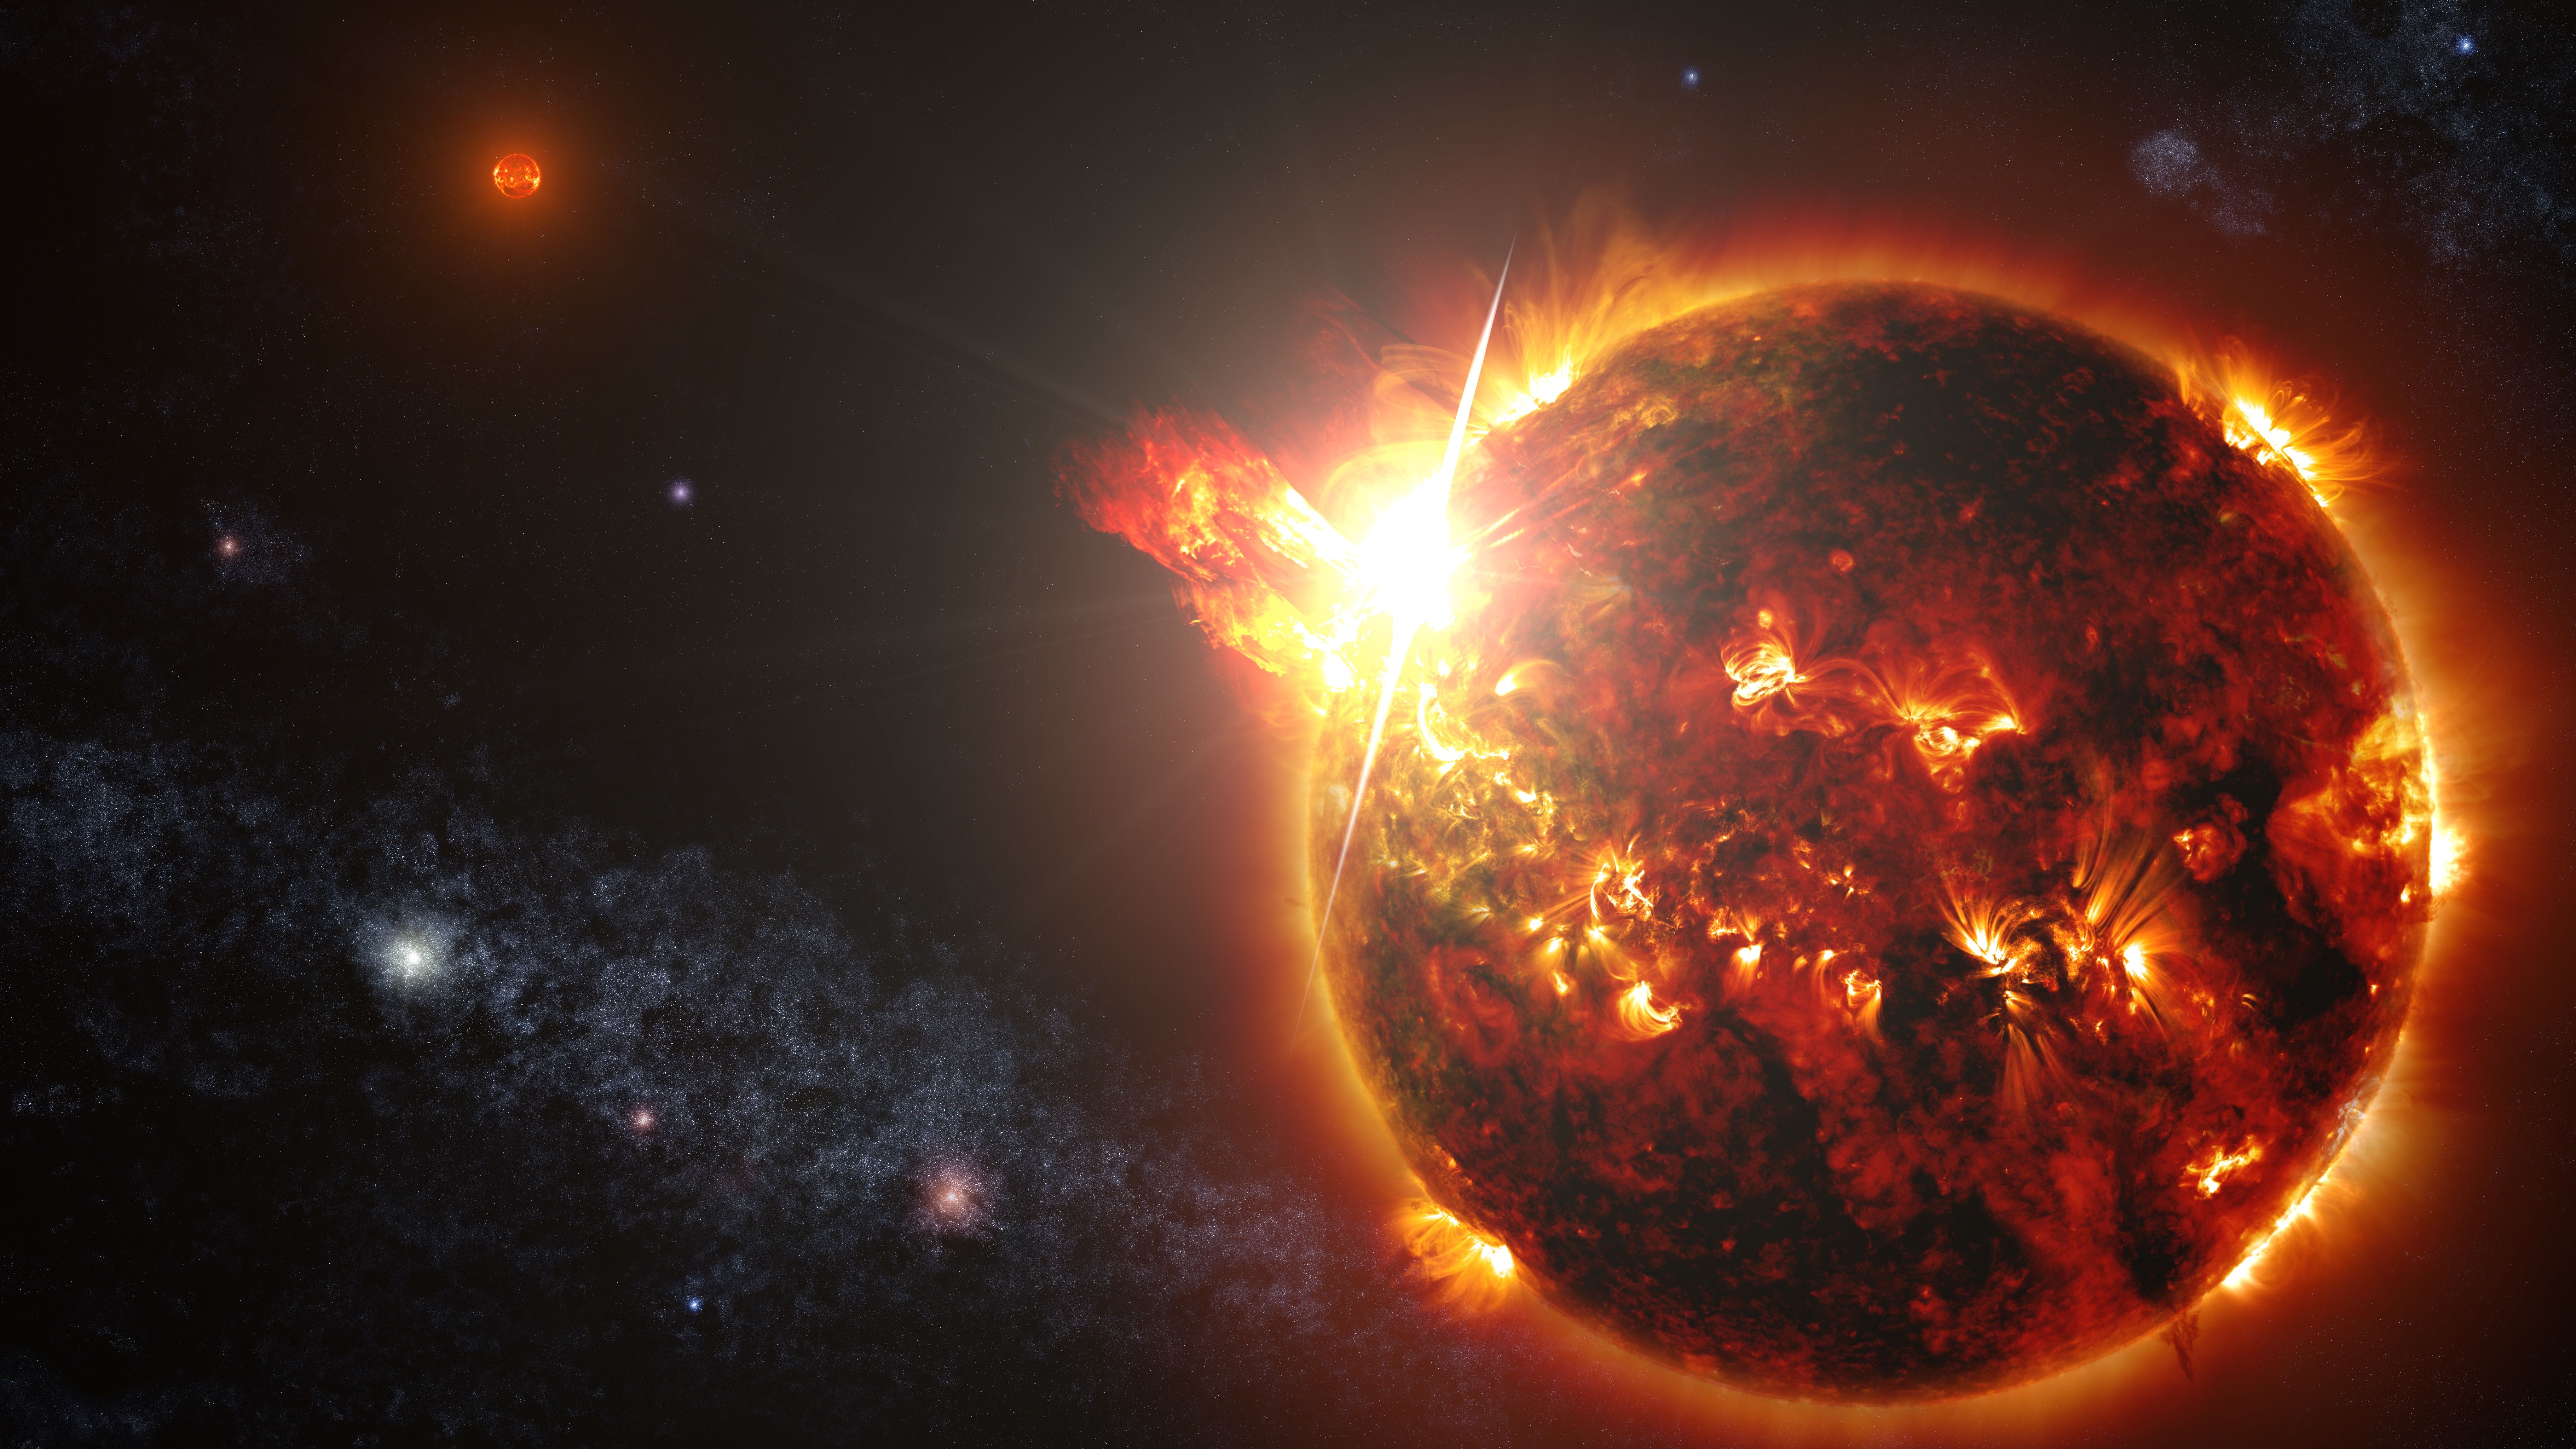 Across The Universe: Foom! 'Superflares' Erupt From Tiny Red Dwarf Star, Surprising Scientists